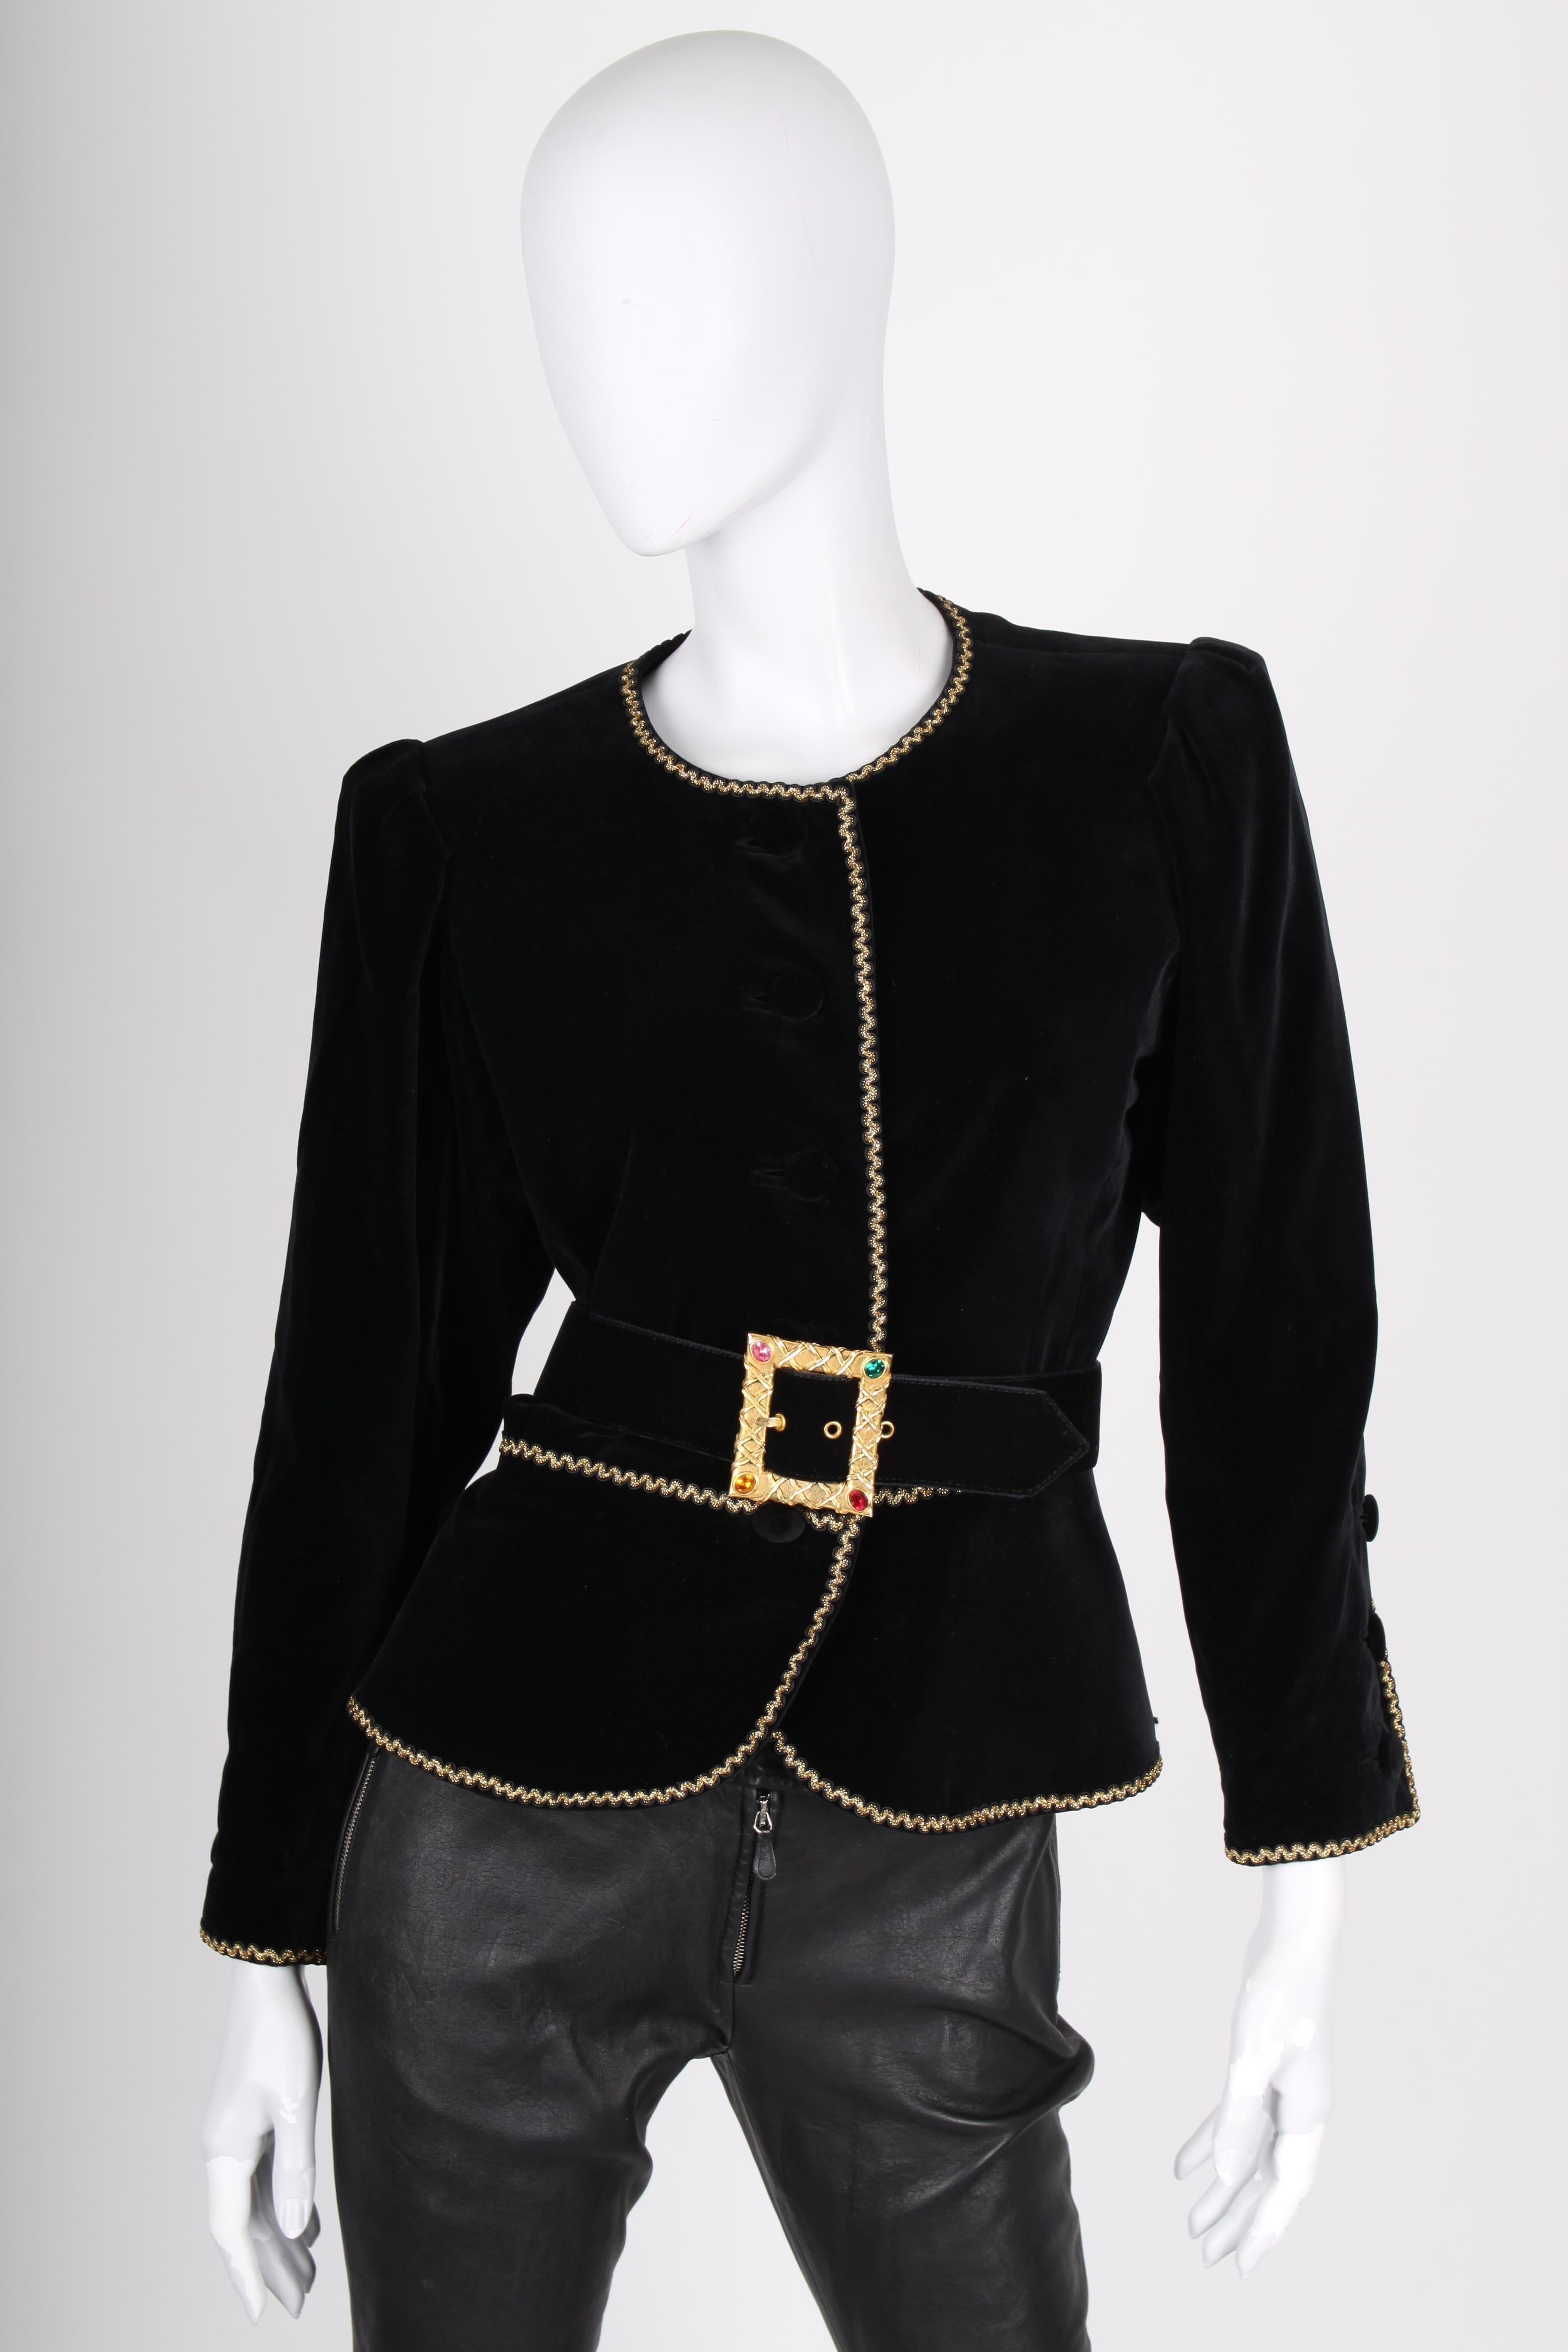 Black velvet jacket by Yves Saint Laurent Rive Gauche. Vintage!

A round neckline and light padding in the shoulders, rather large puff sleeves with three buttons at the end. Front closure with five buttons. No pockets. Fully lined with black shiny